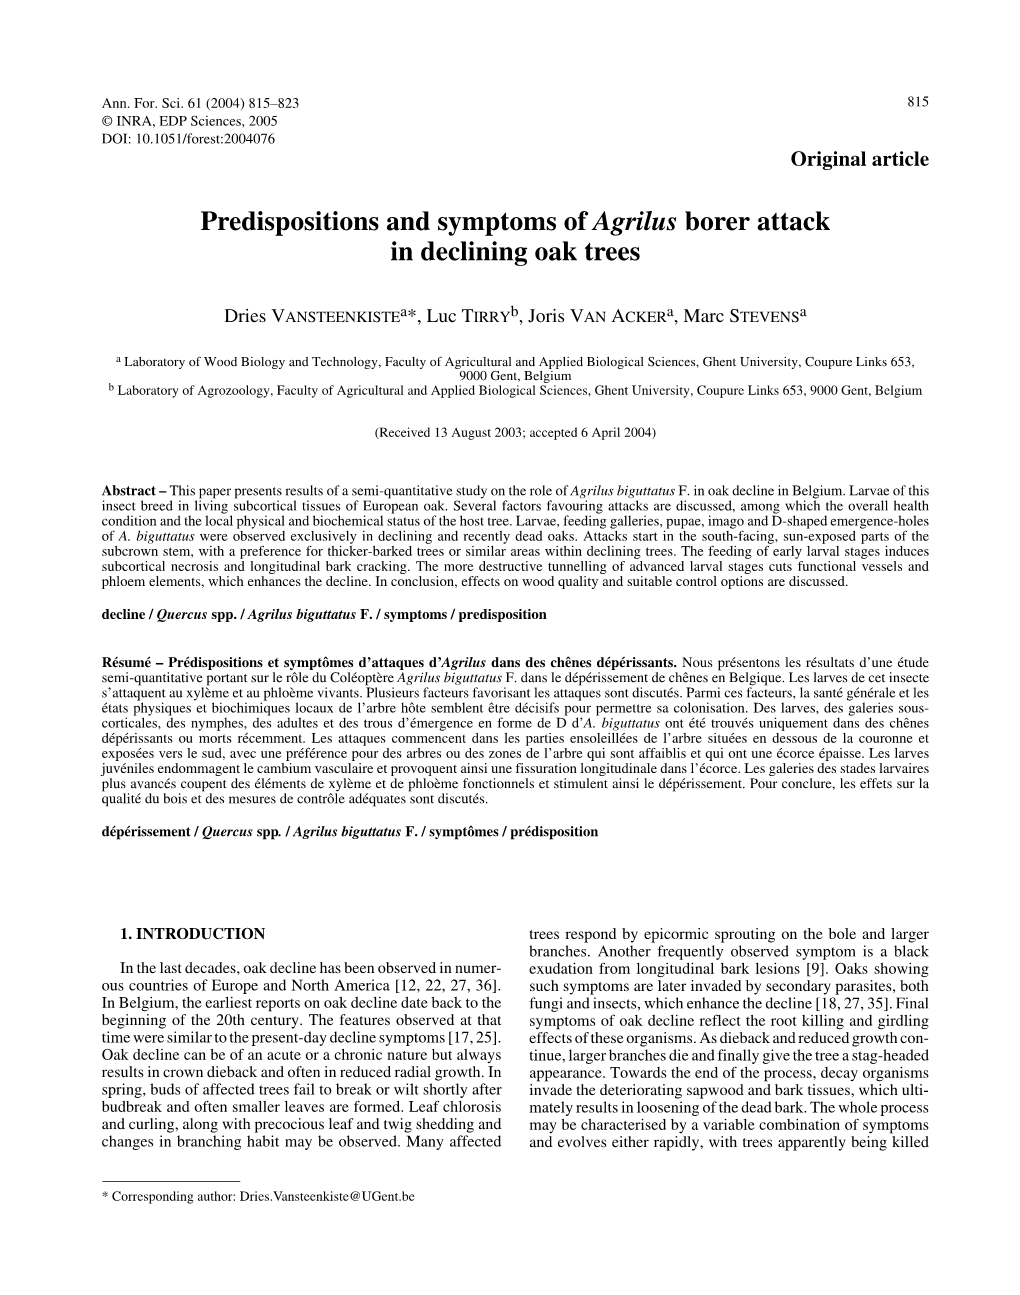 Predispositions and Symptoms of Agrilus Borer Attack in Declining Oak Trees